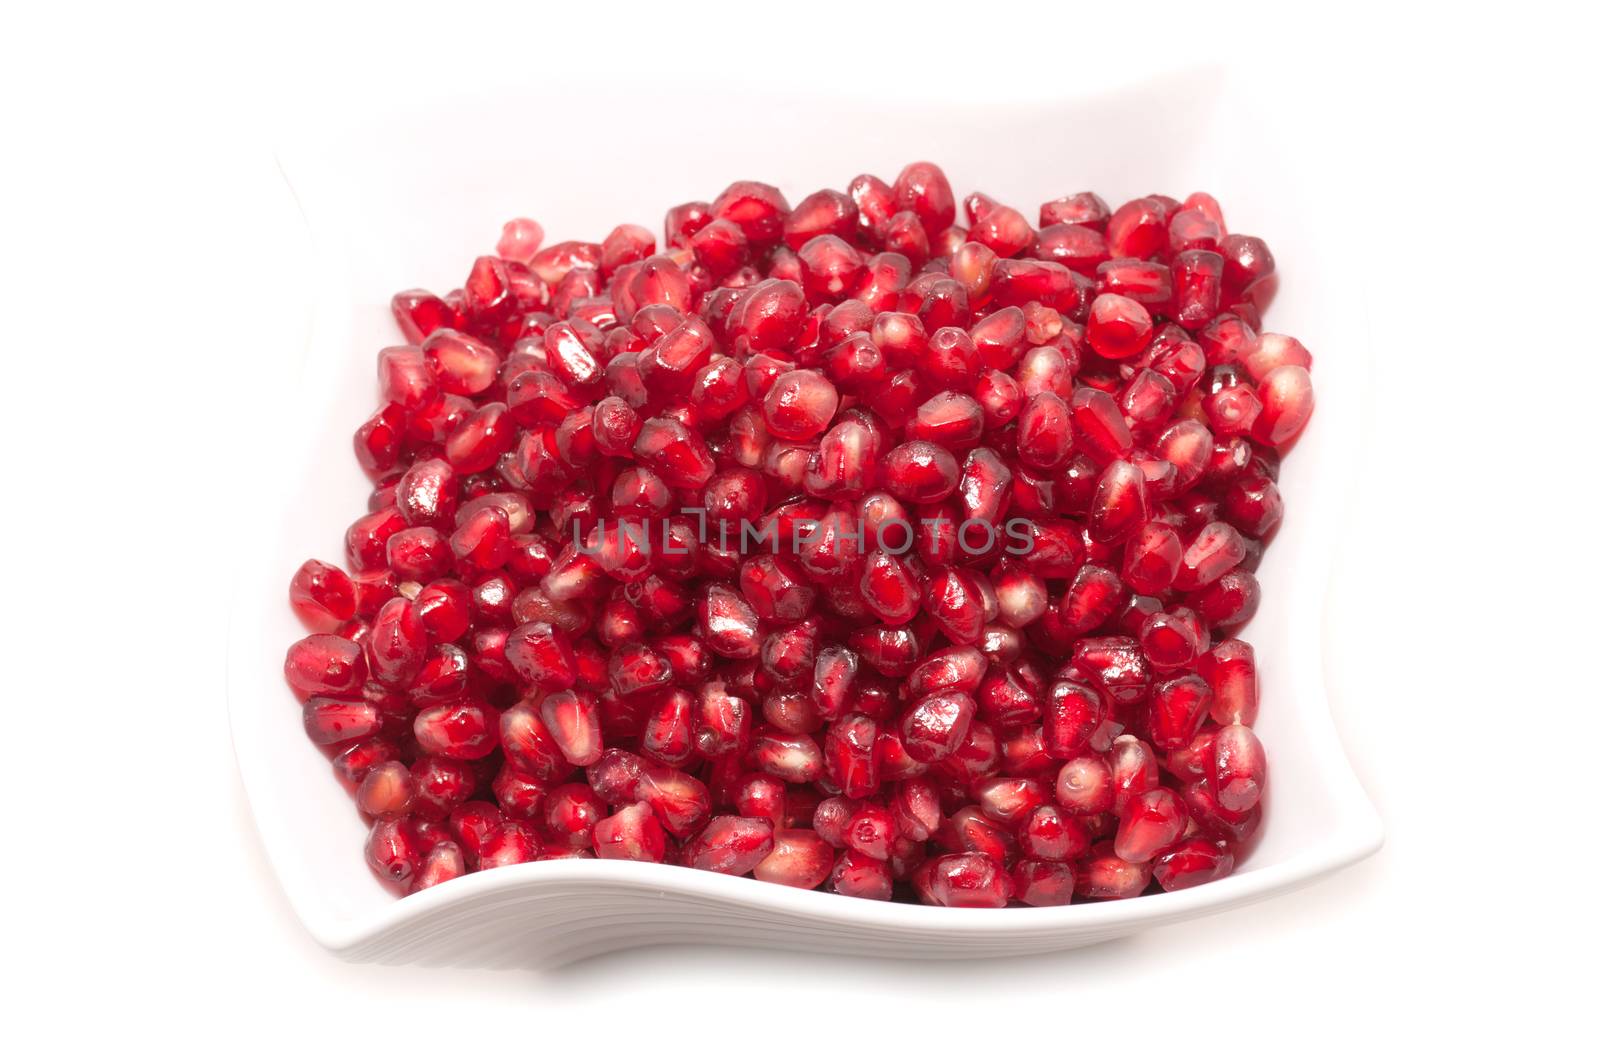 Pomegranate seeds close-up  by daoleduc